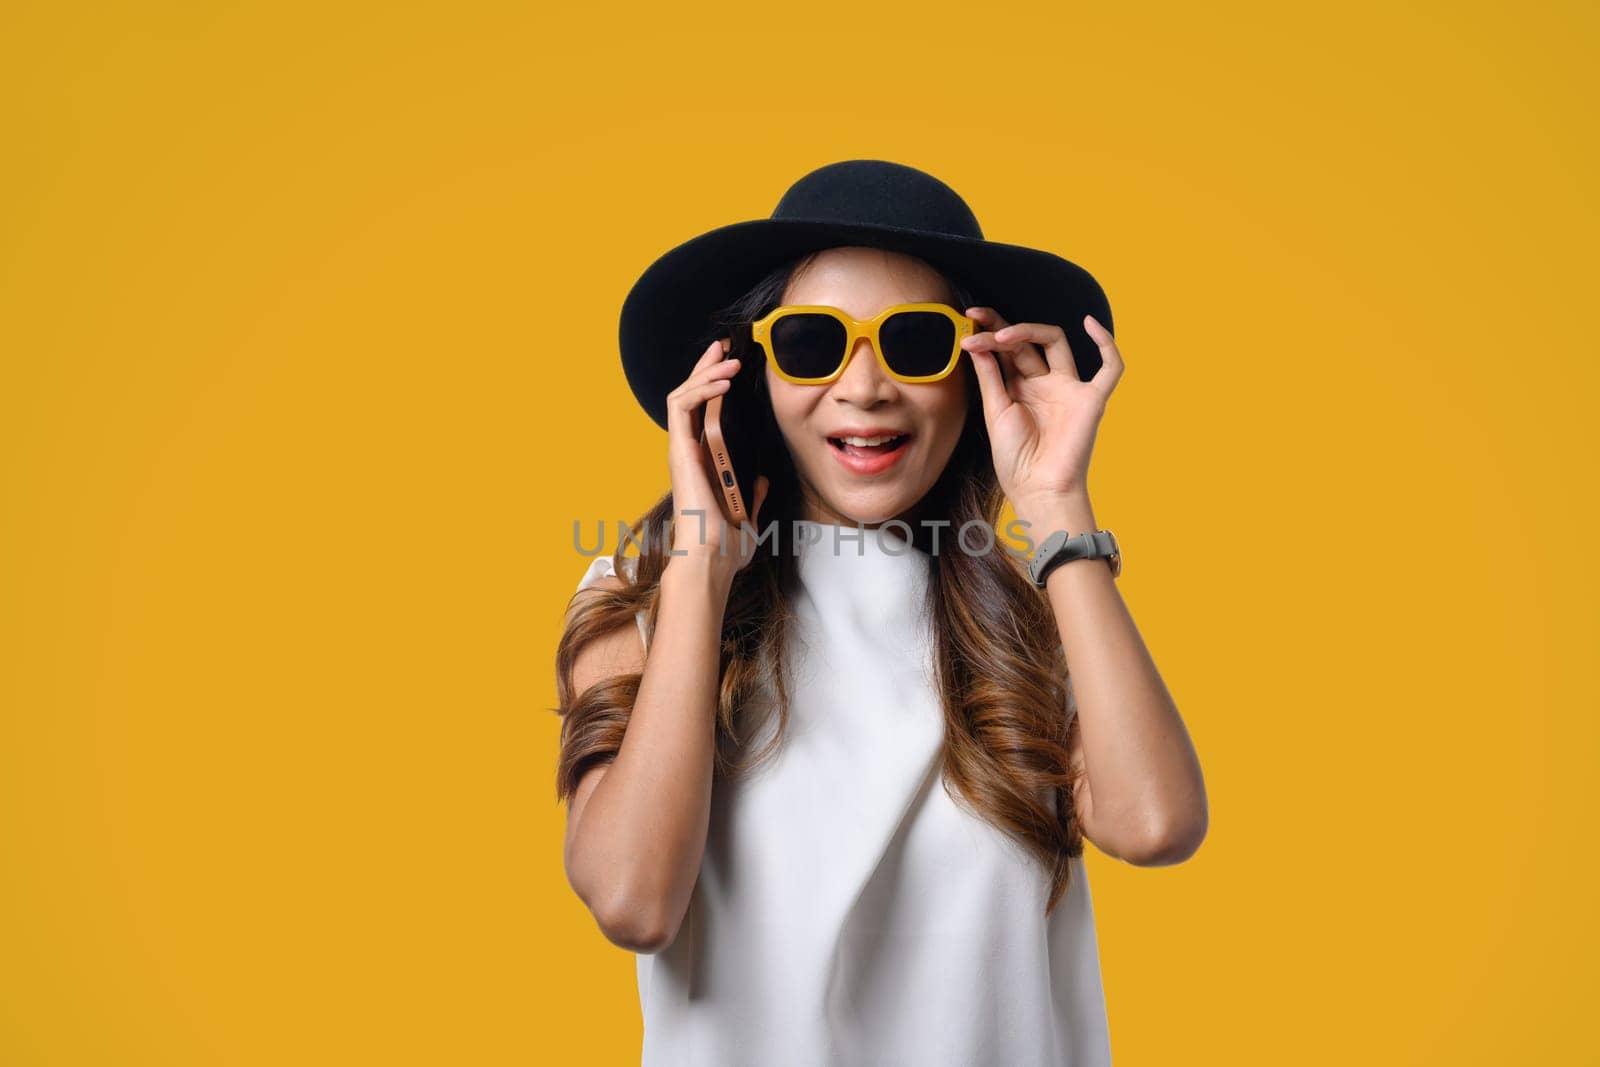 Smiling young woman wearing summer clothing talking on mobile phone isolated on yellow background by prathanchorruangsak